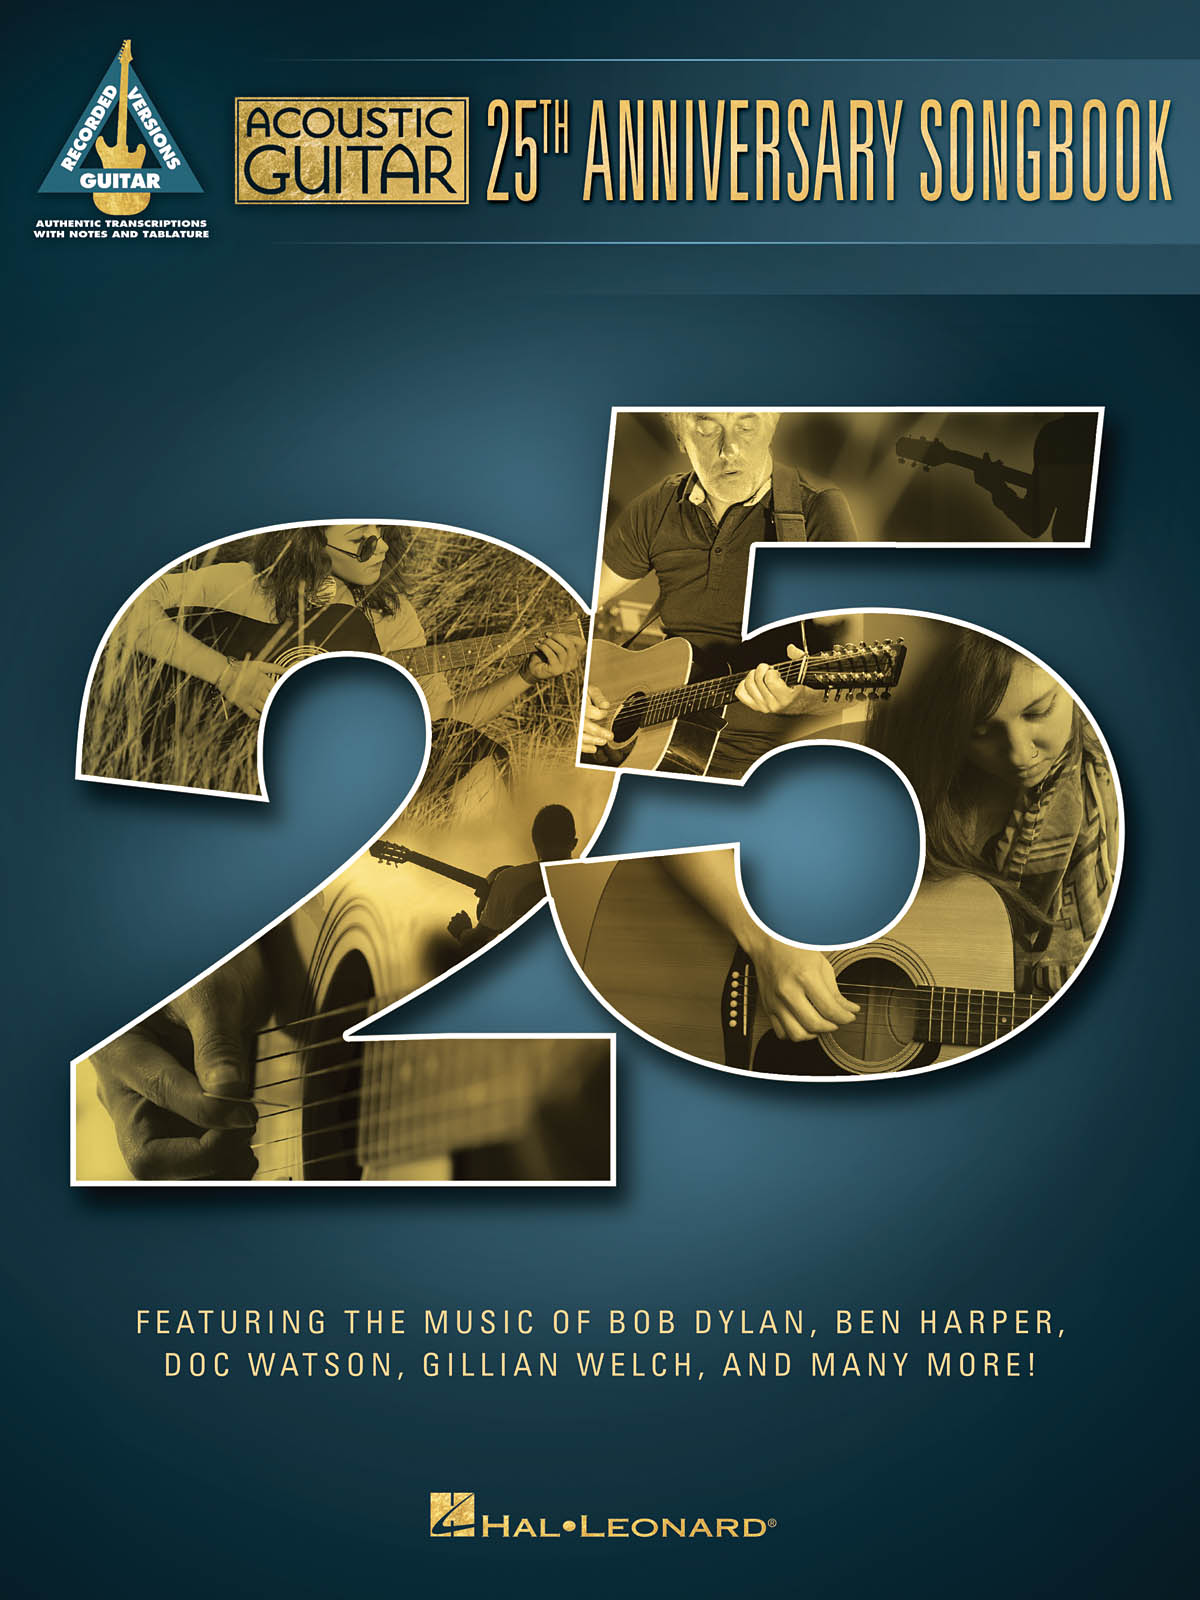 Acoustic Guitar 25th Anniversary Songbook: Guitar Solo: Mixed Songbook